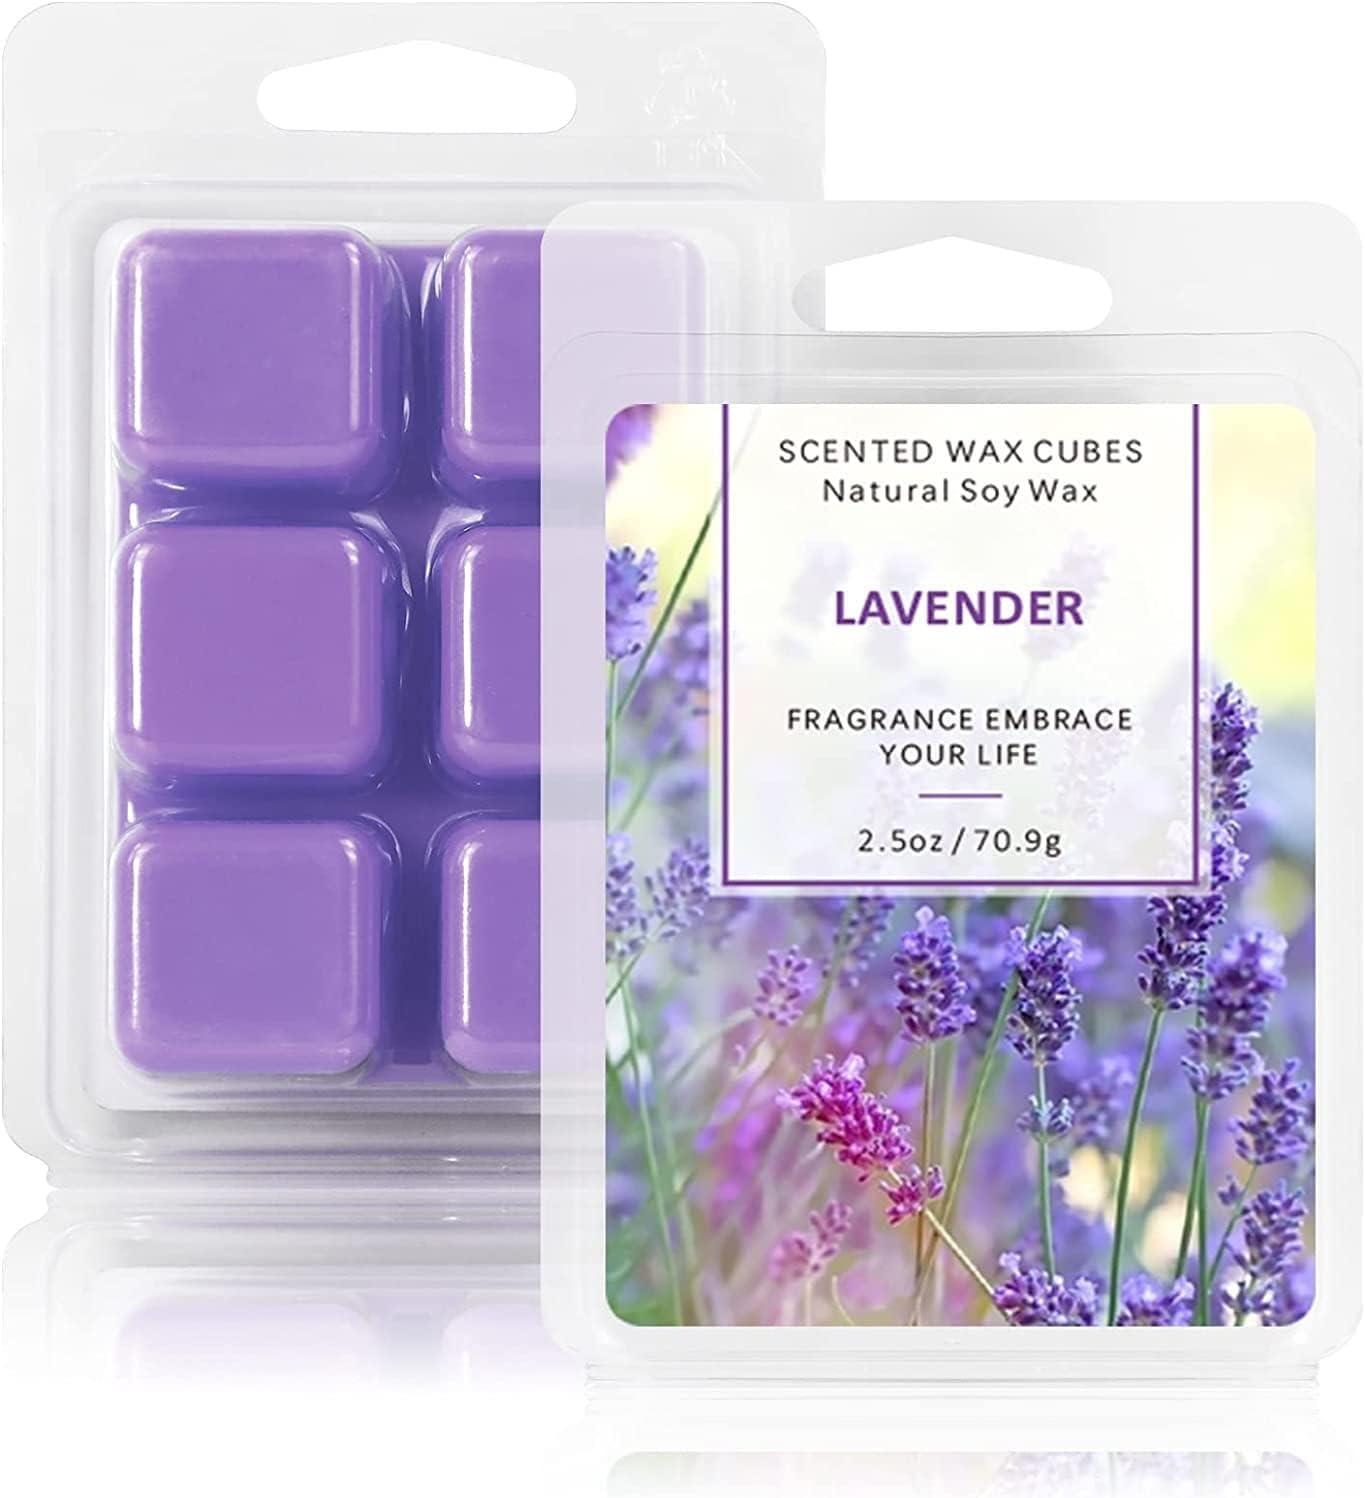 LA BELLEFE Wax Melts Wax Cubes, Lavender Scented Wax Melts for Warmers,  Natural Soy Wax Melts Birthday Gift Set, Scent Wax Cubes for Weddings,  Parties, Spa, Meditation (2.5oz/70.9g*2)